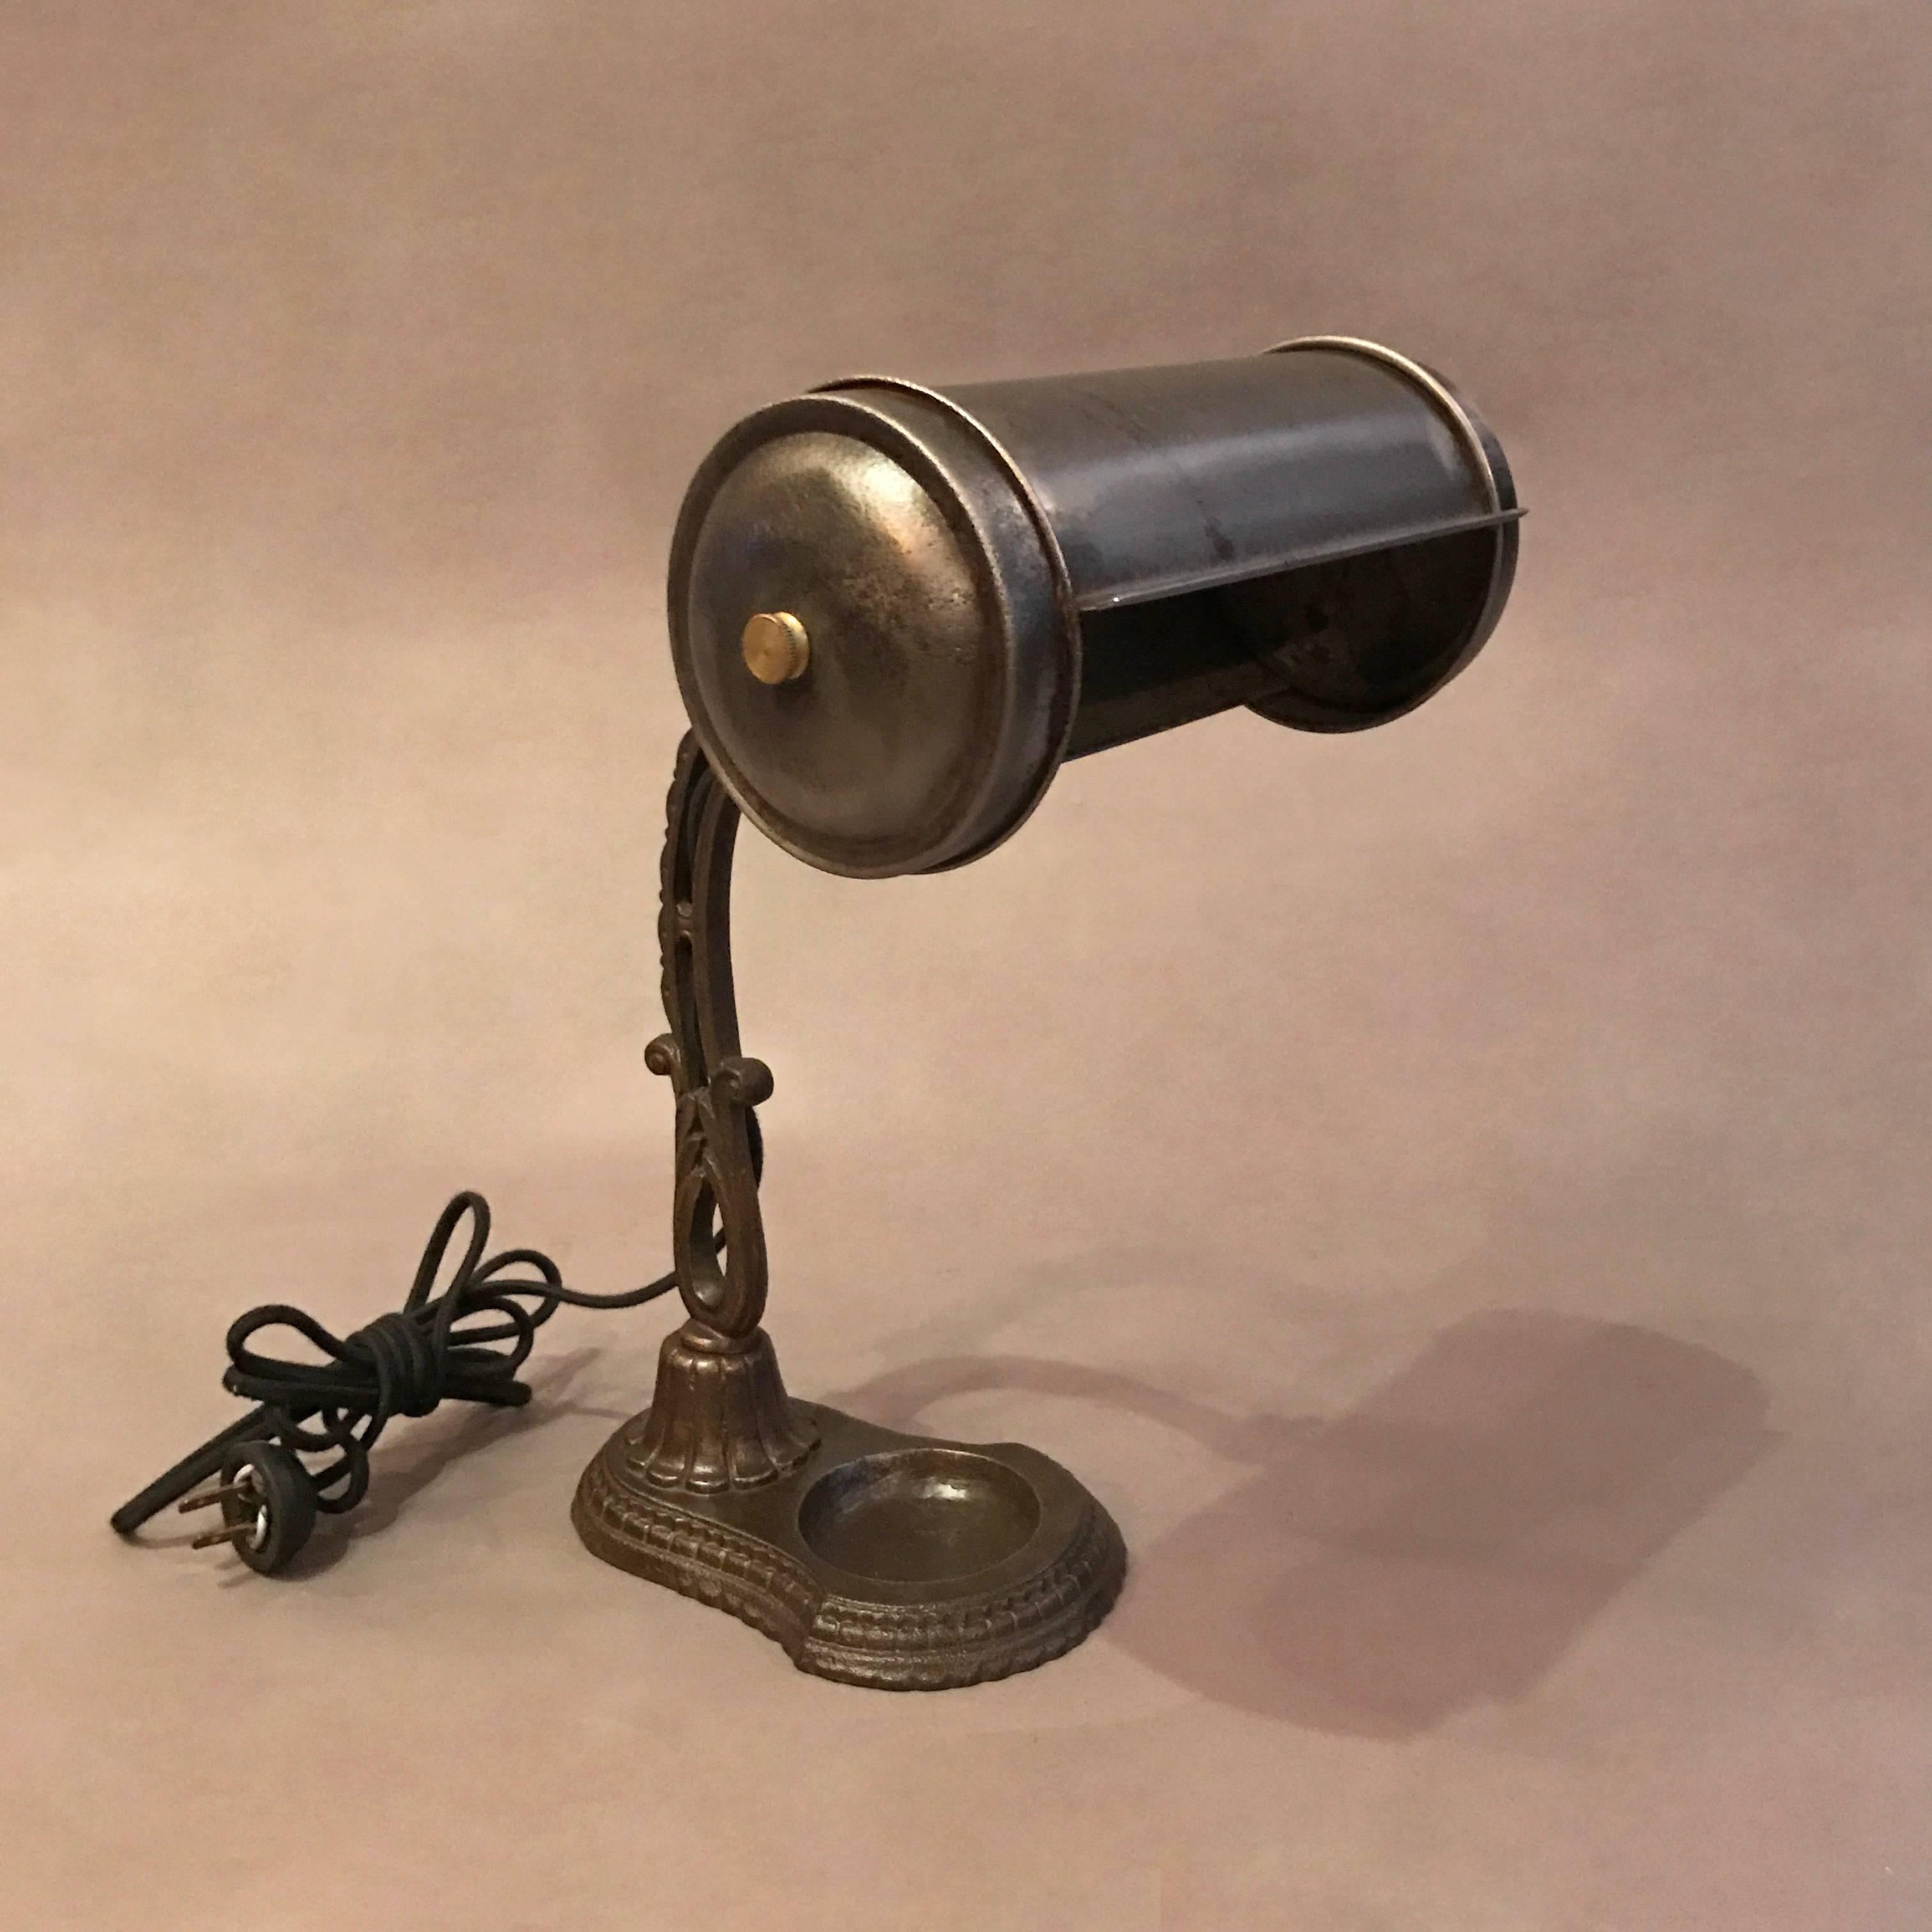 Early 20th century, library desk lamp features an ornate cast iron base and stem with a brushed steel rolled shade that articulates up and down. The lamp is newly wired with black cloth cord to accept up to a 100 watt bulb.